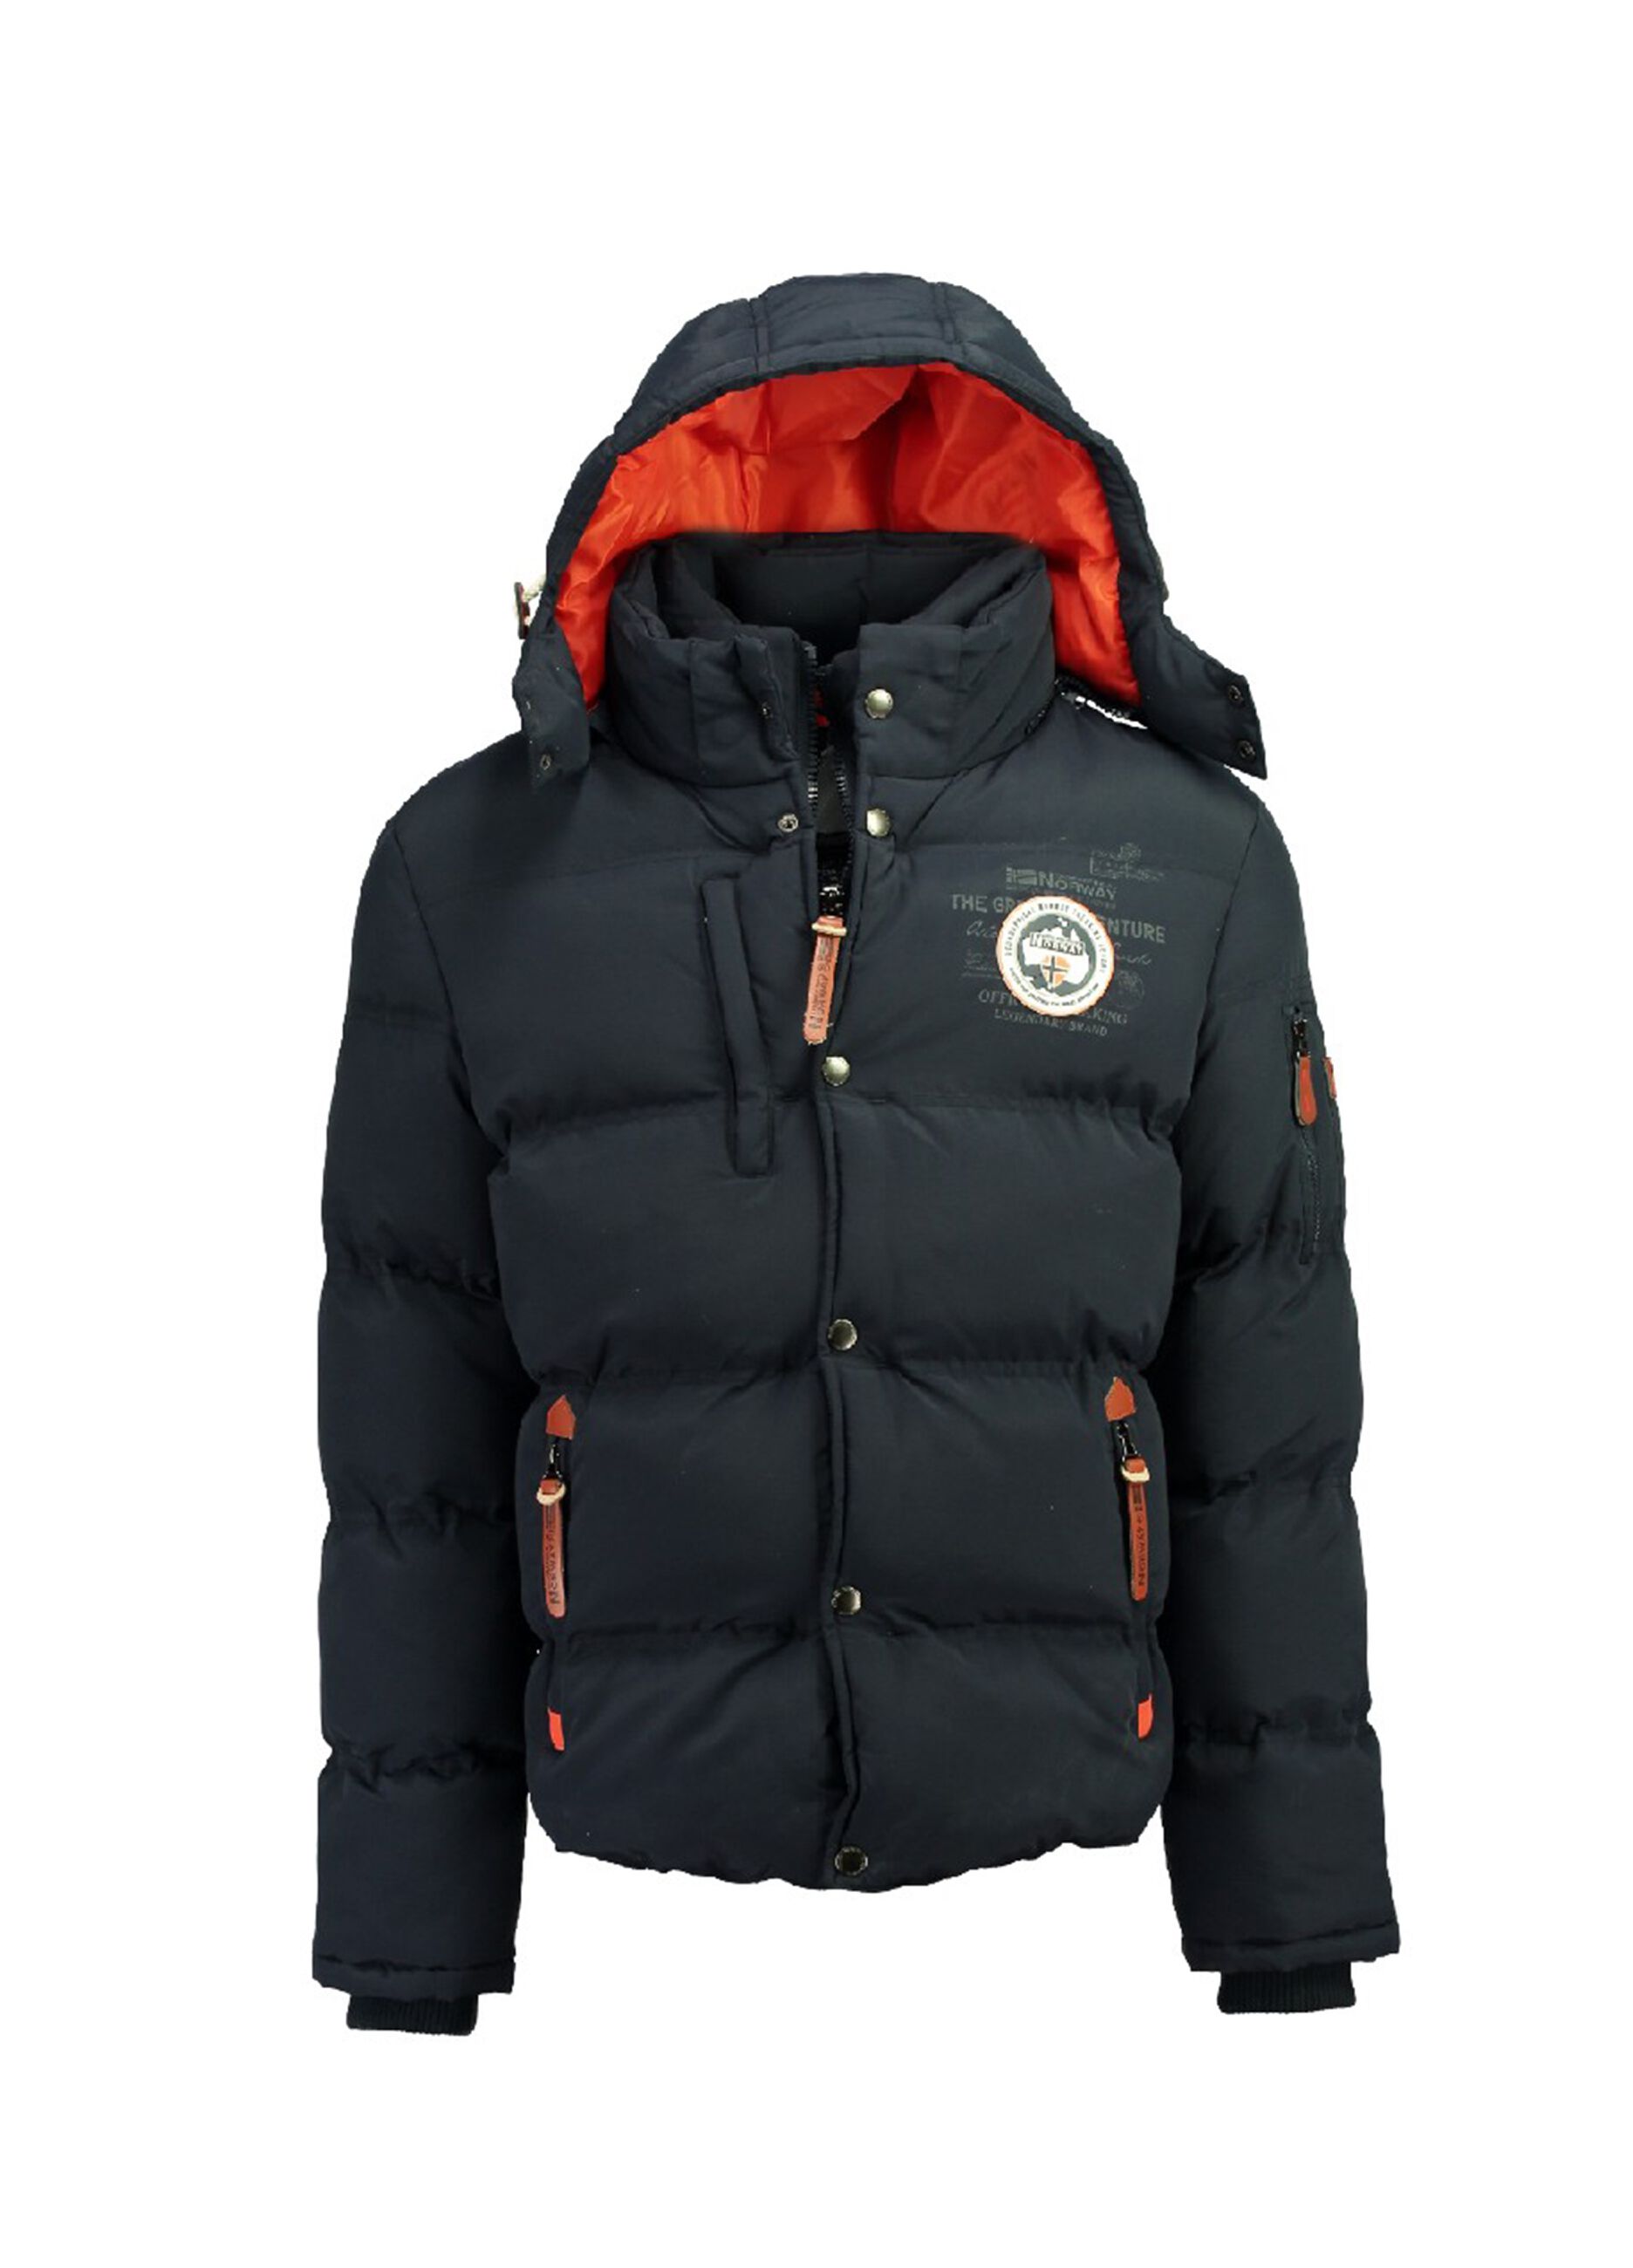 GEOGRAPHICAL NORWAY Man's Navy Blue Geographical Norway down jacket with  detachable hood